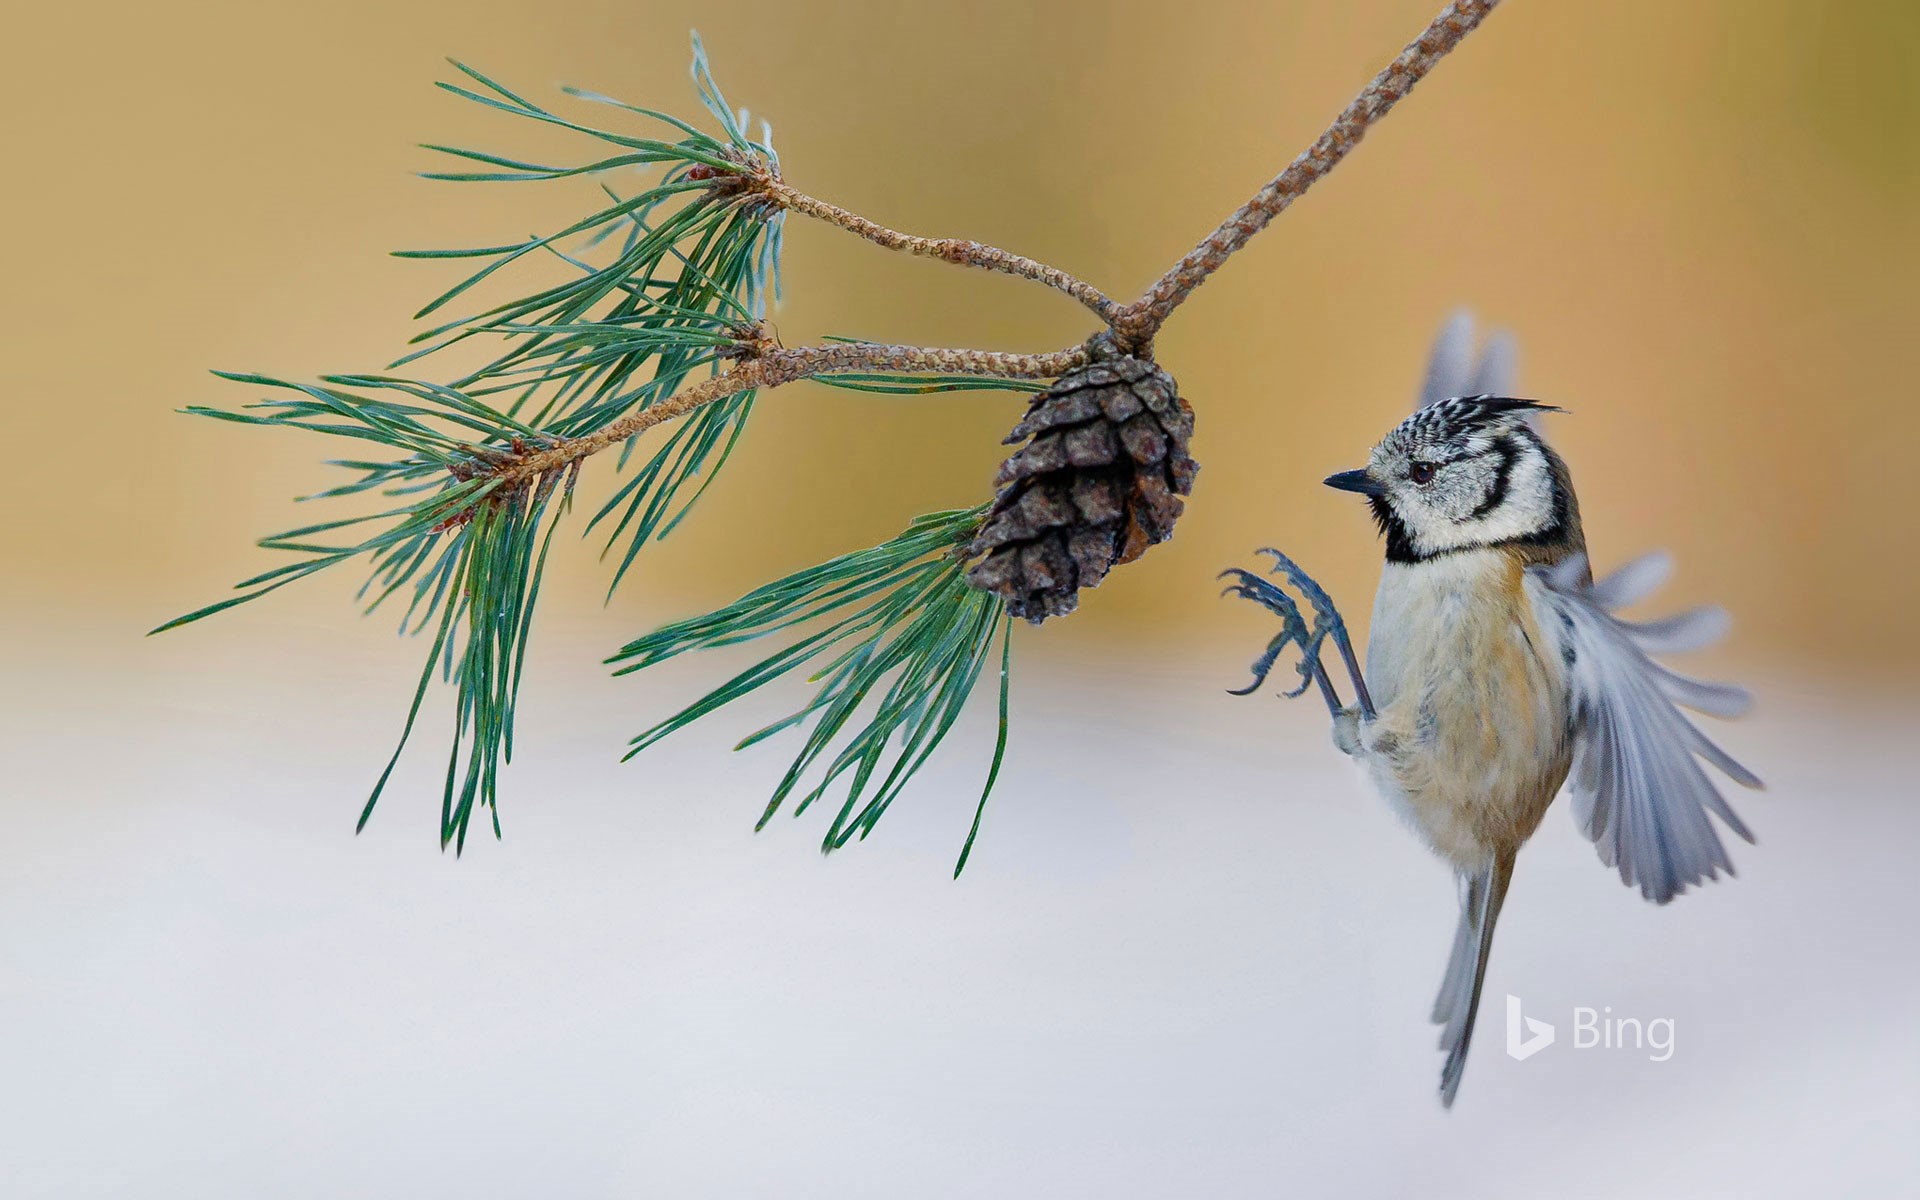 A European crested tit lands on a pine tree in France